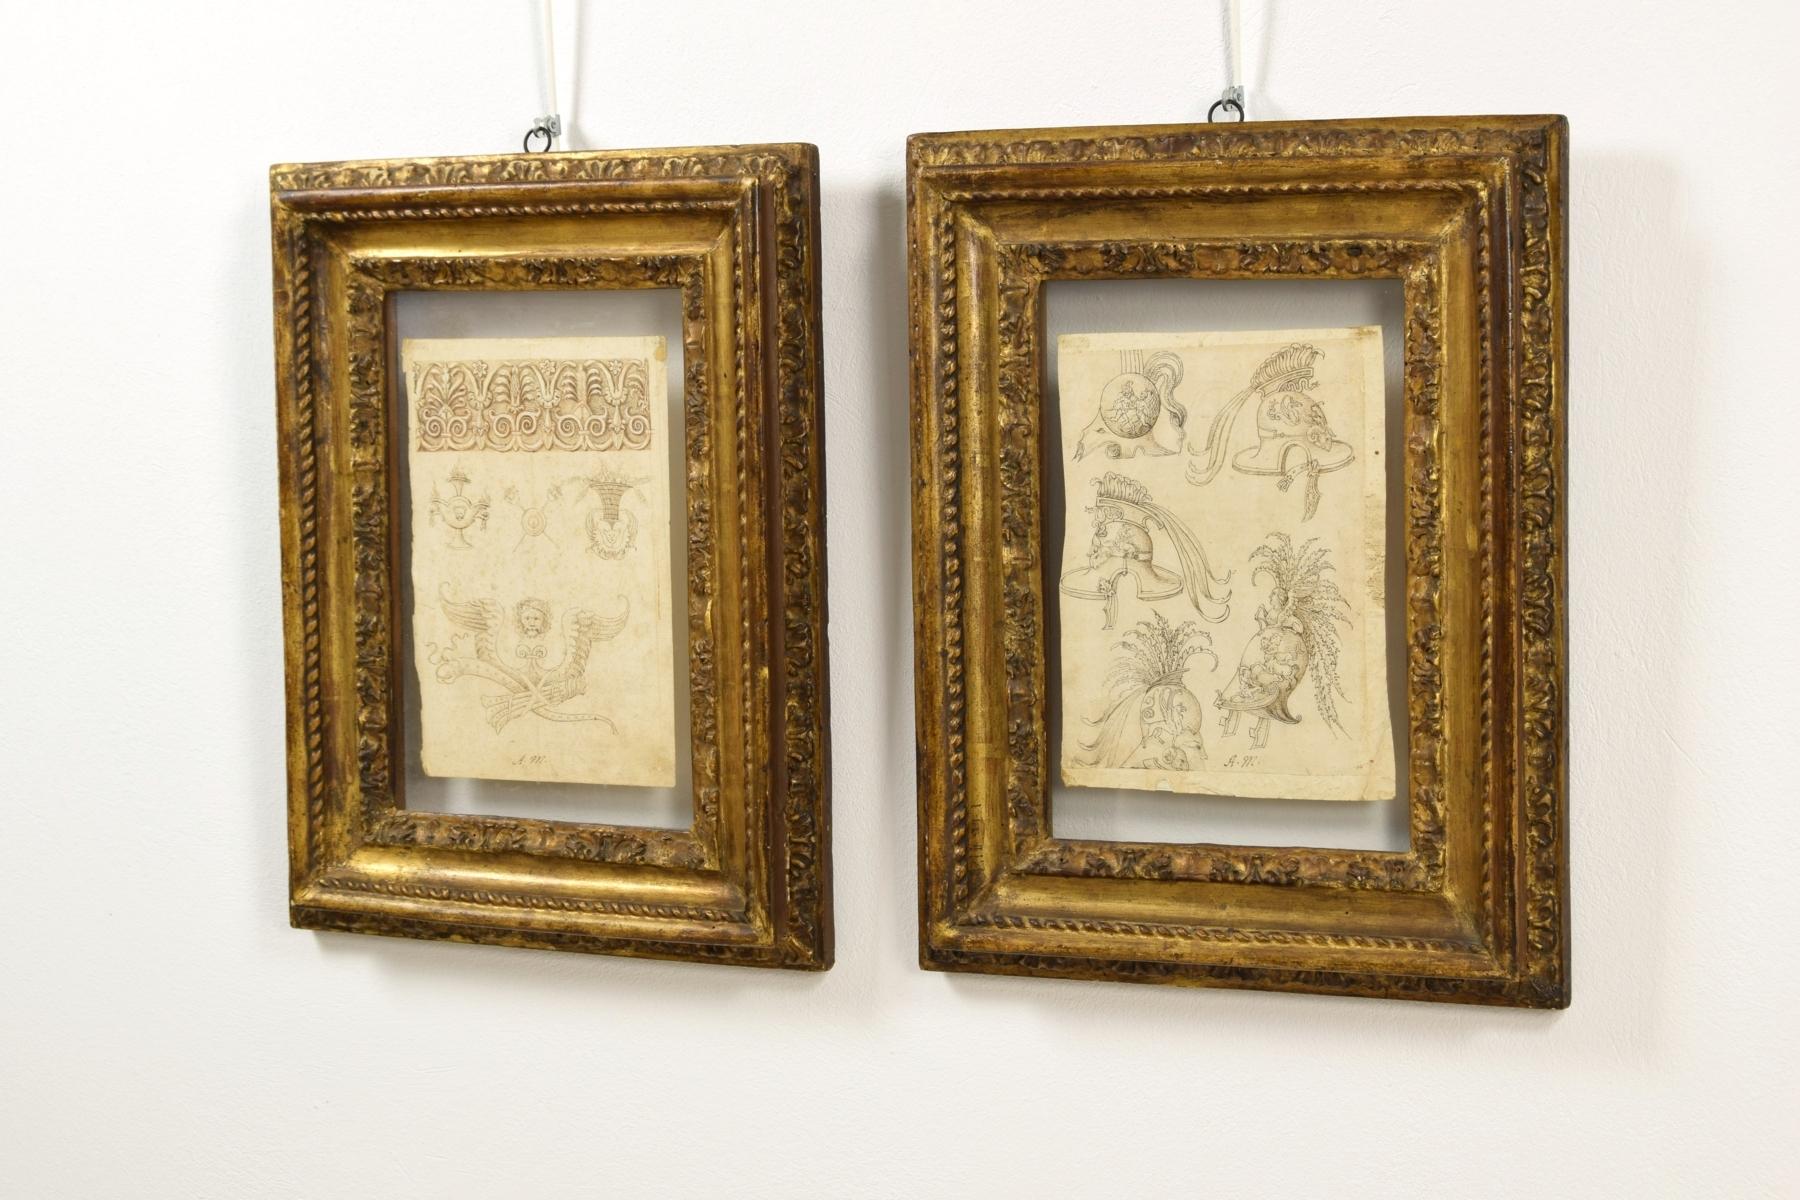 Baroque 17th Century, Pair of Italian Ink Drawings on Paper with Studies for Grotesques For Sale